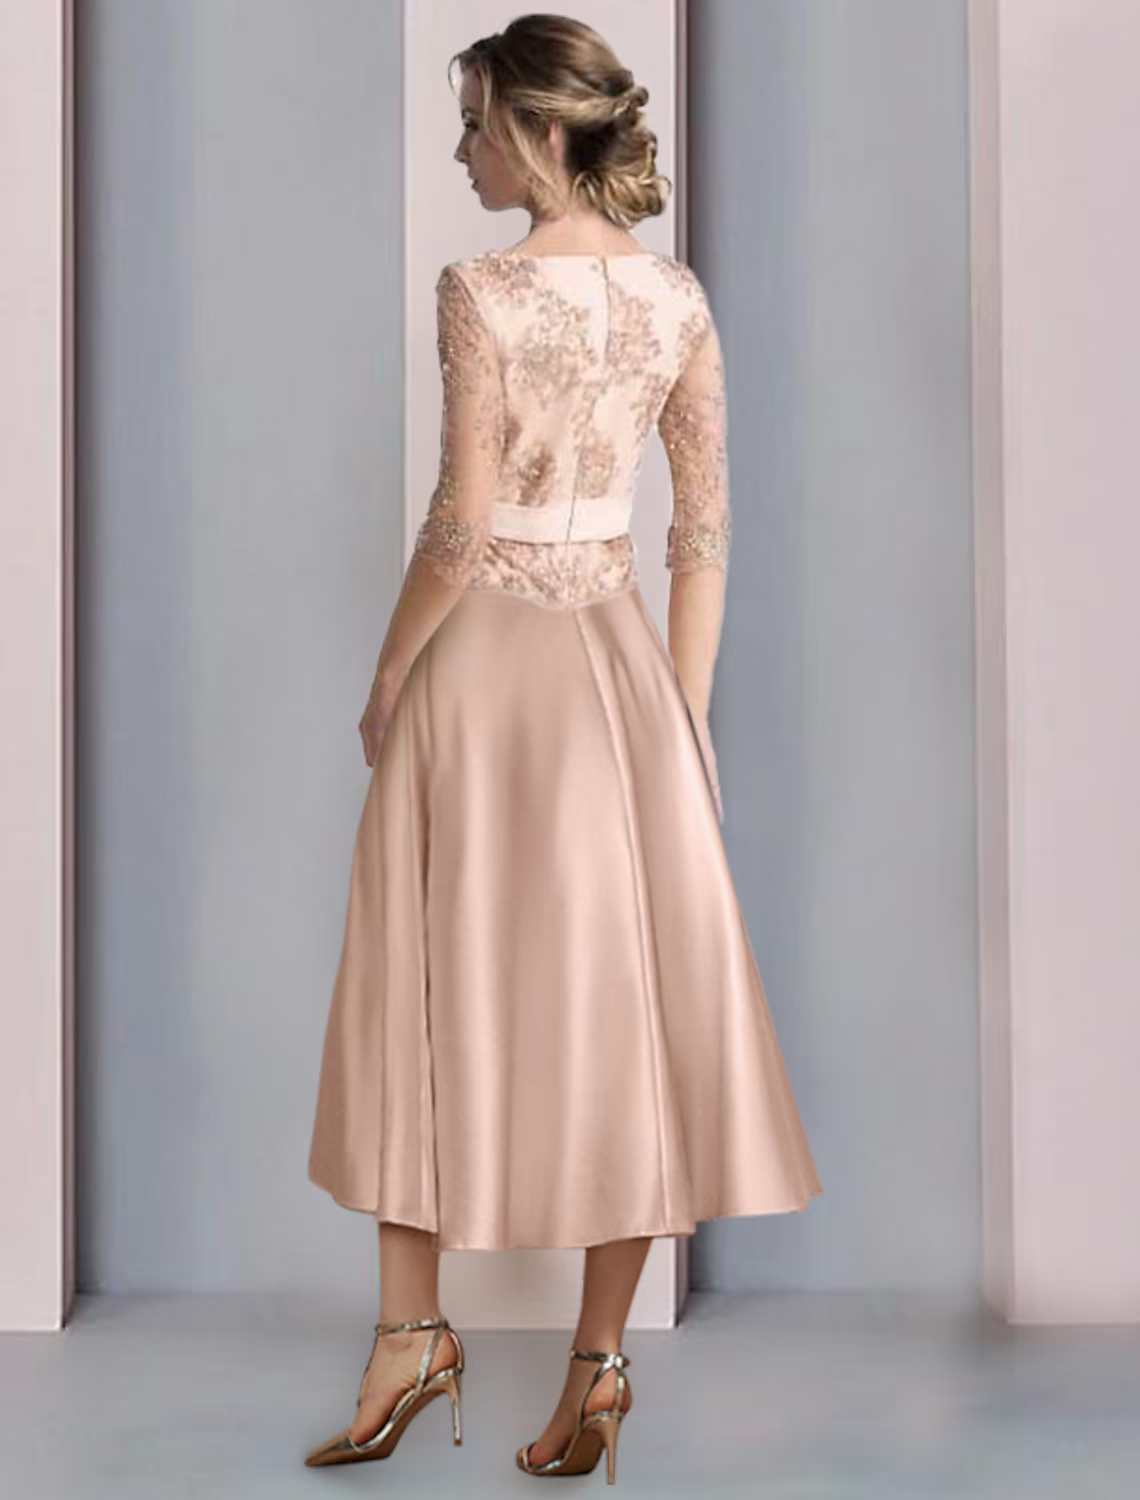 A-Line Mother of the Bride Dress Formal Wedding Guest Vintage Party Elegant Scoop Neck Satin Lace Half Sleeve with Flower